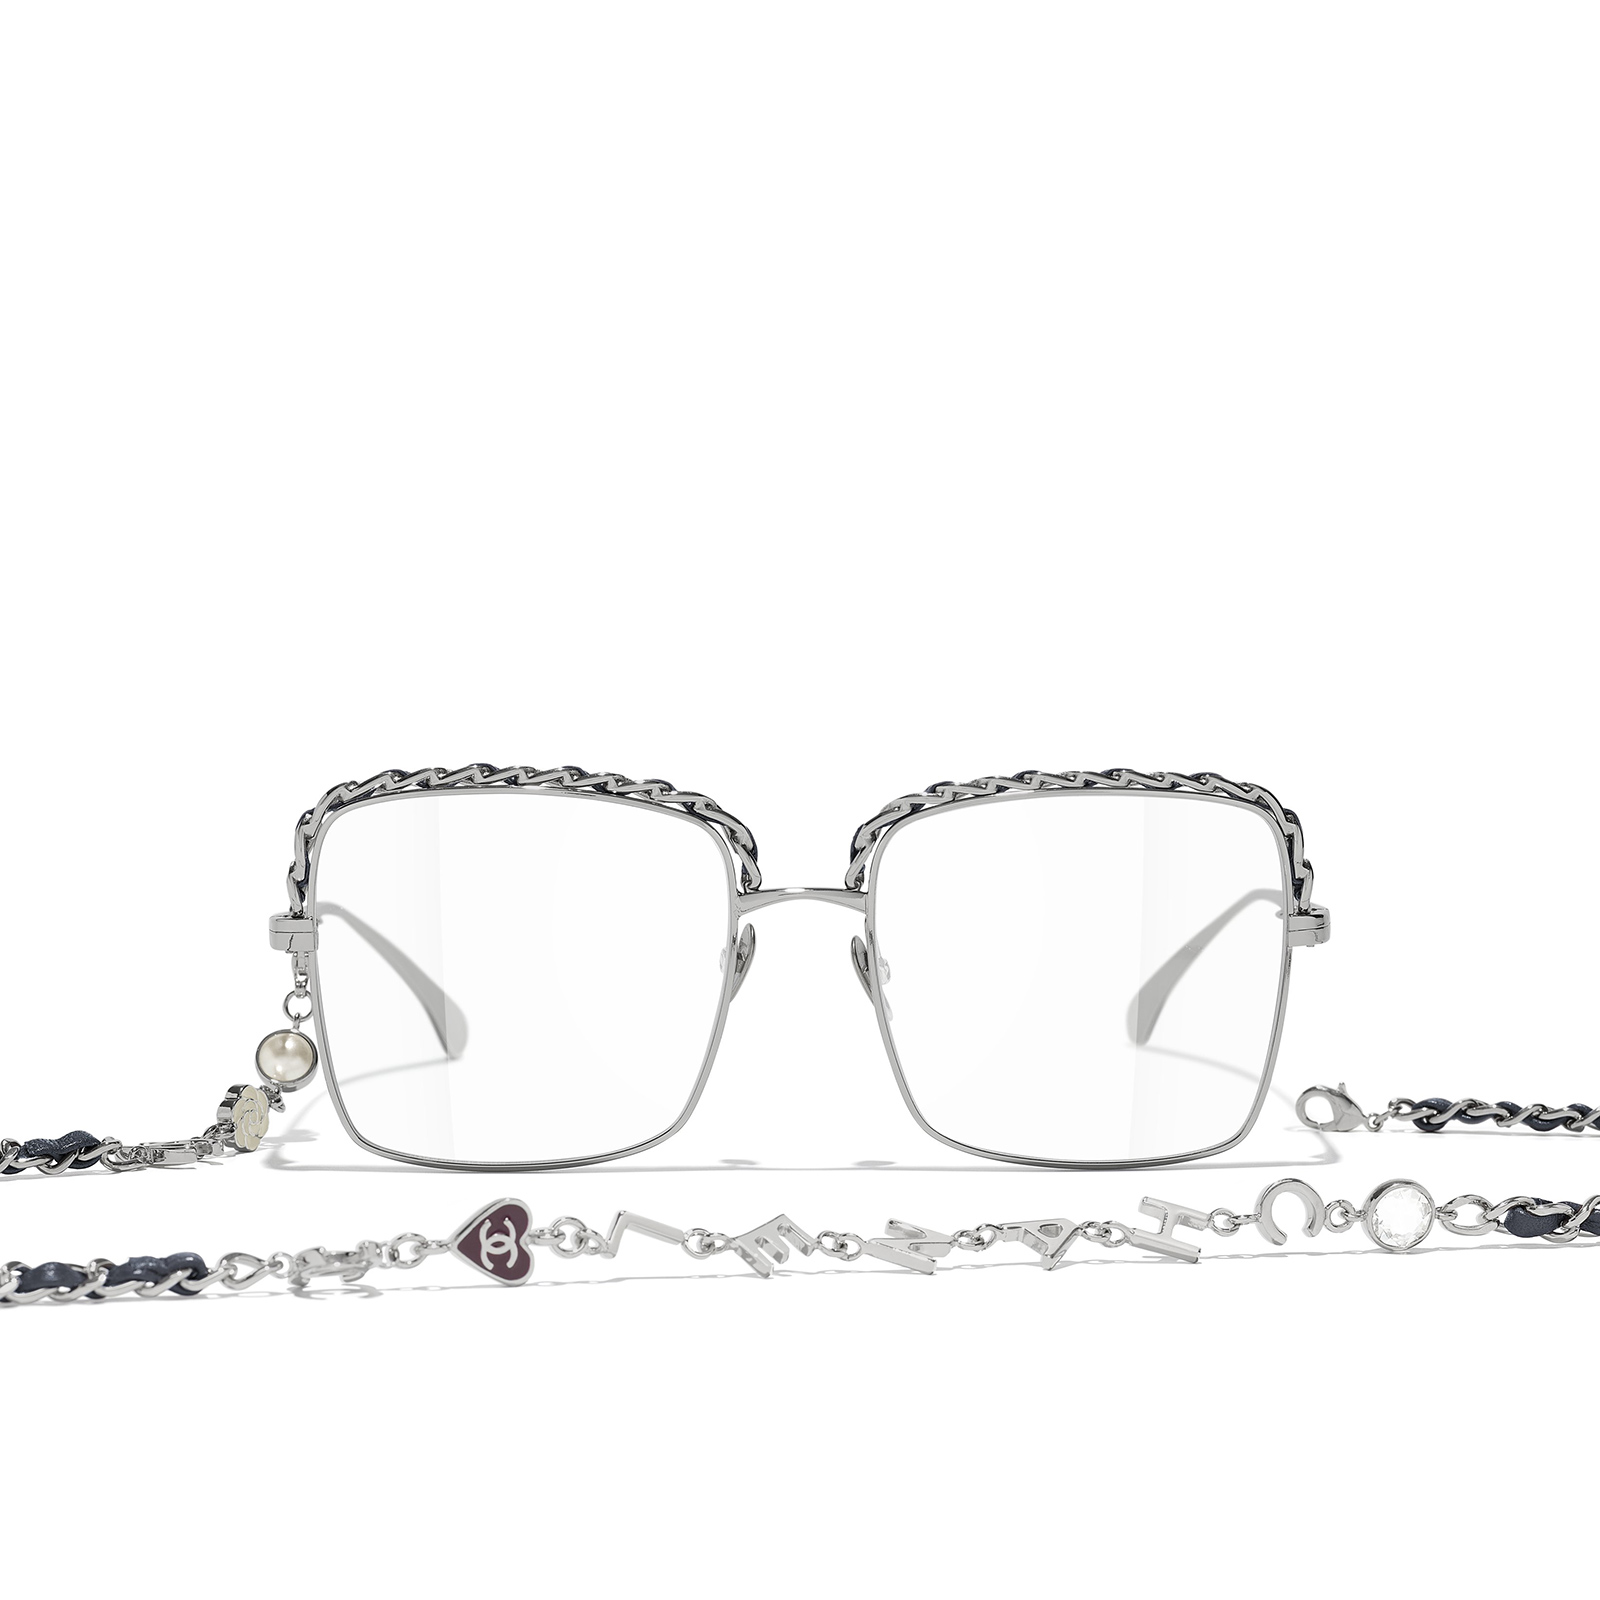 CHANEL square Eyeglasses C108 Dark Silver & Blue - front view